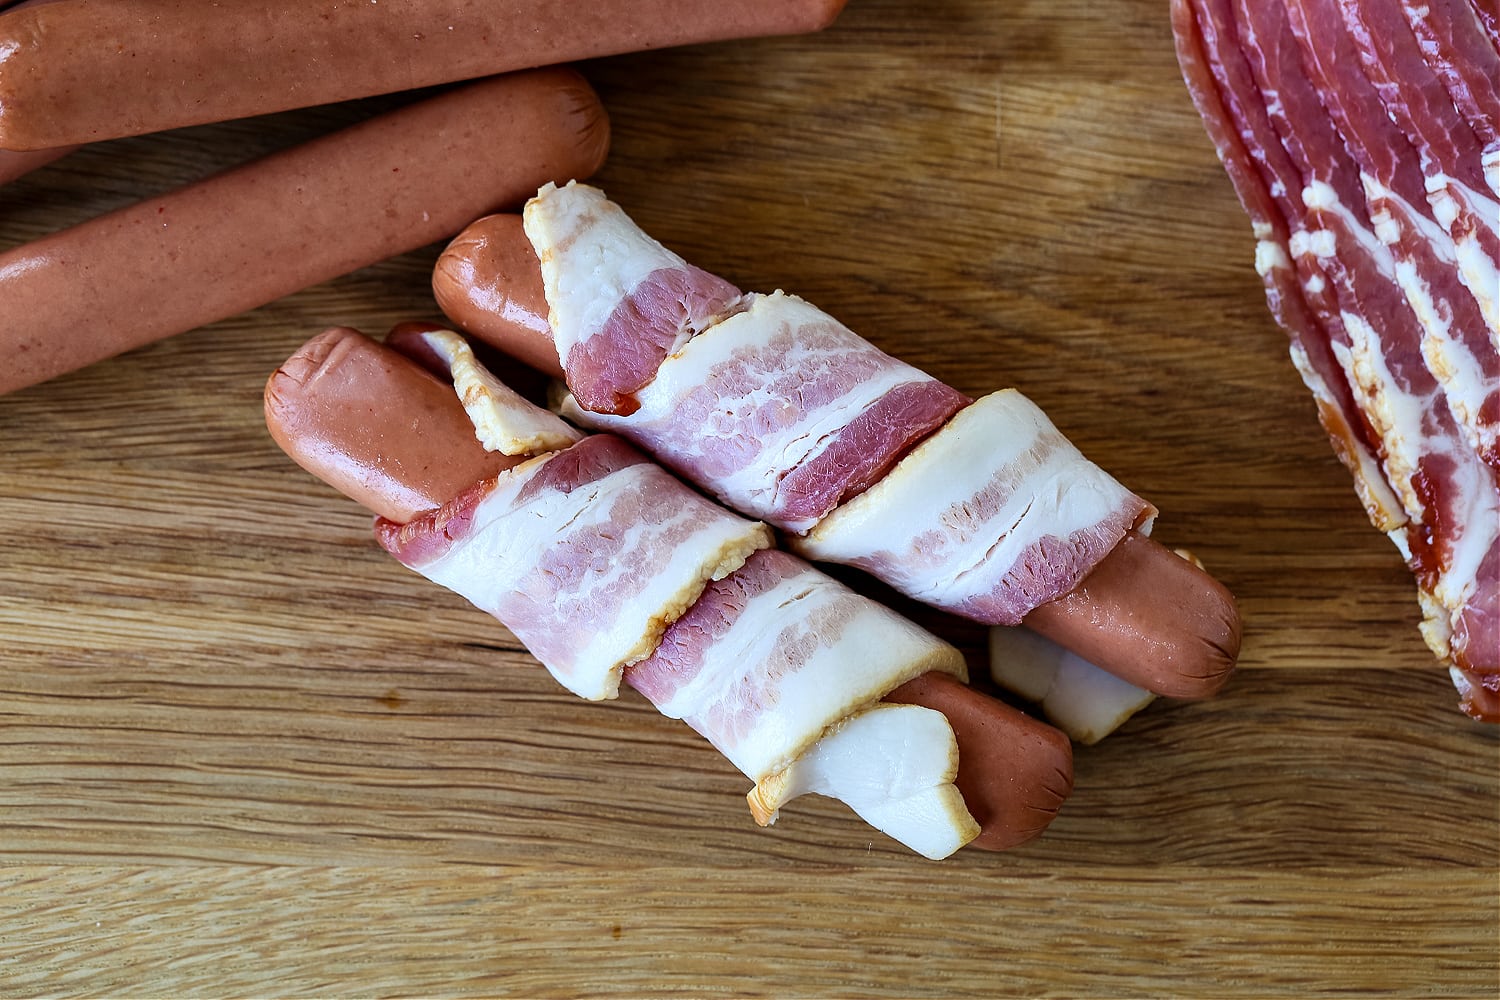 bacon wrapped around hot dogs on a board